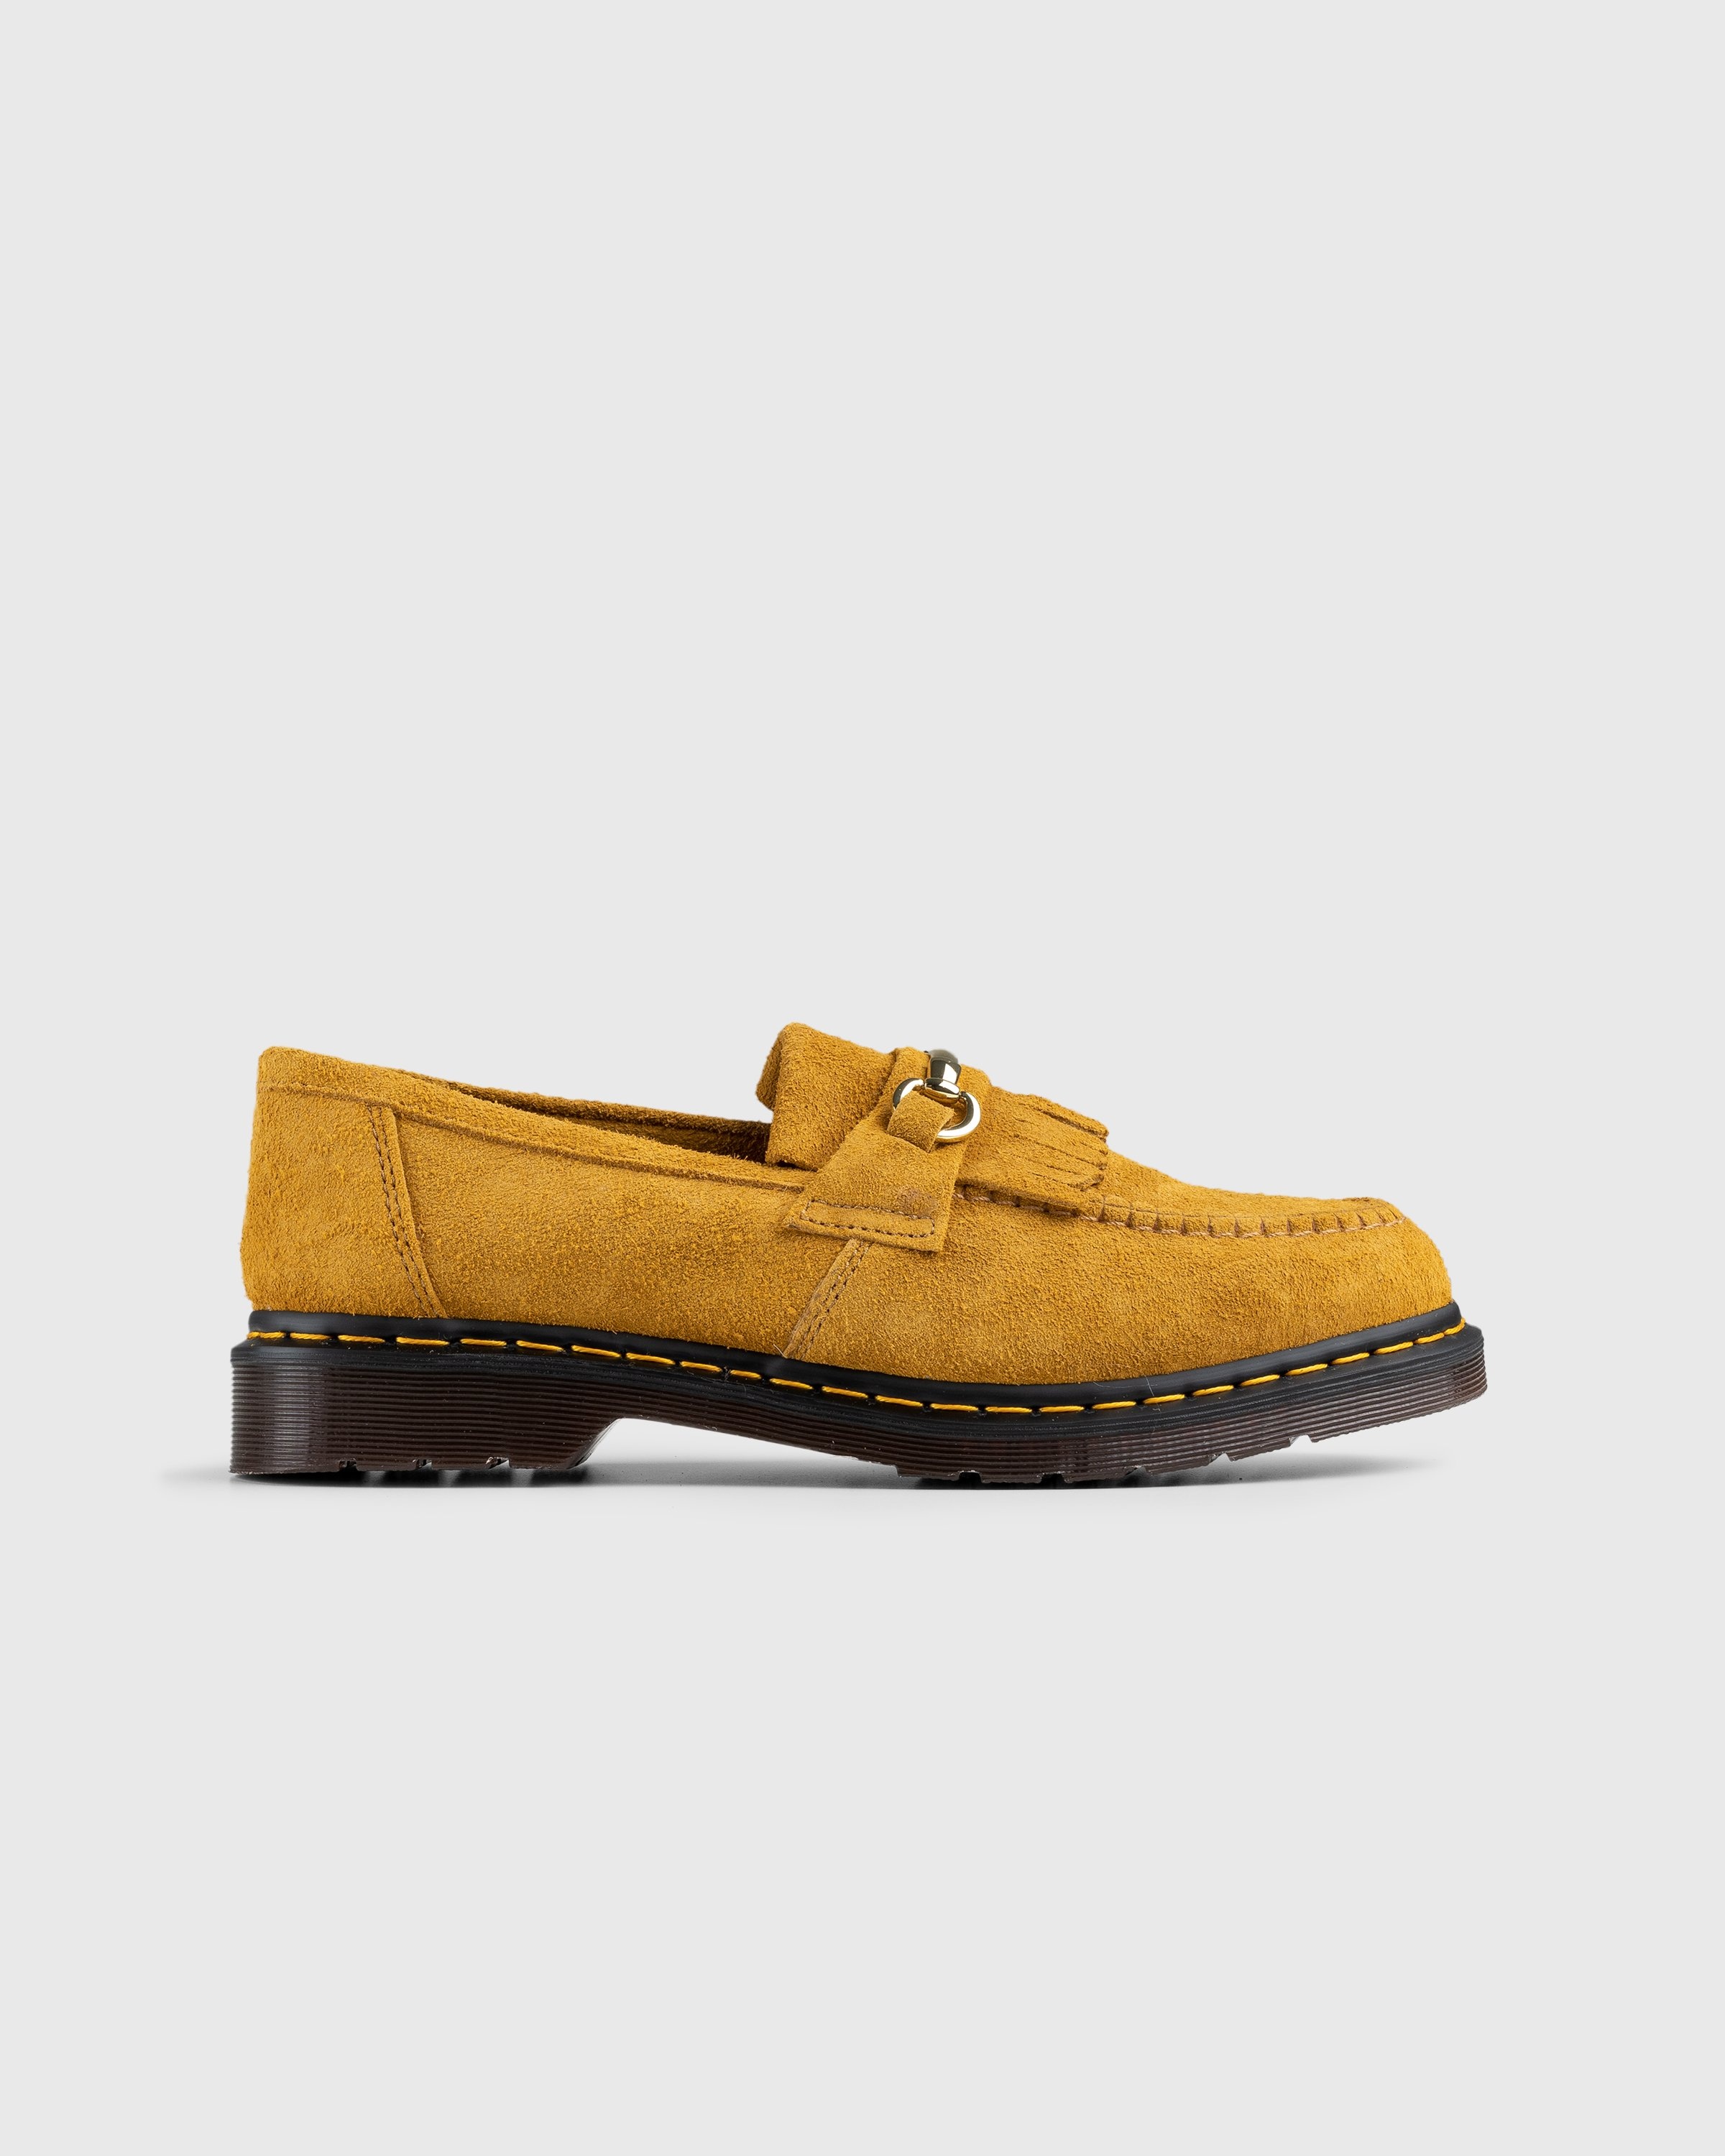 Dr. Martens – Adrian Snaffle Suede Loafers Light Tan Desert Oasis Suede (Gum Oil) - Loafers - Brown - Image 1